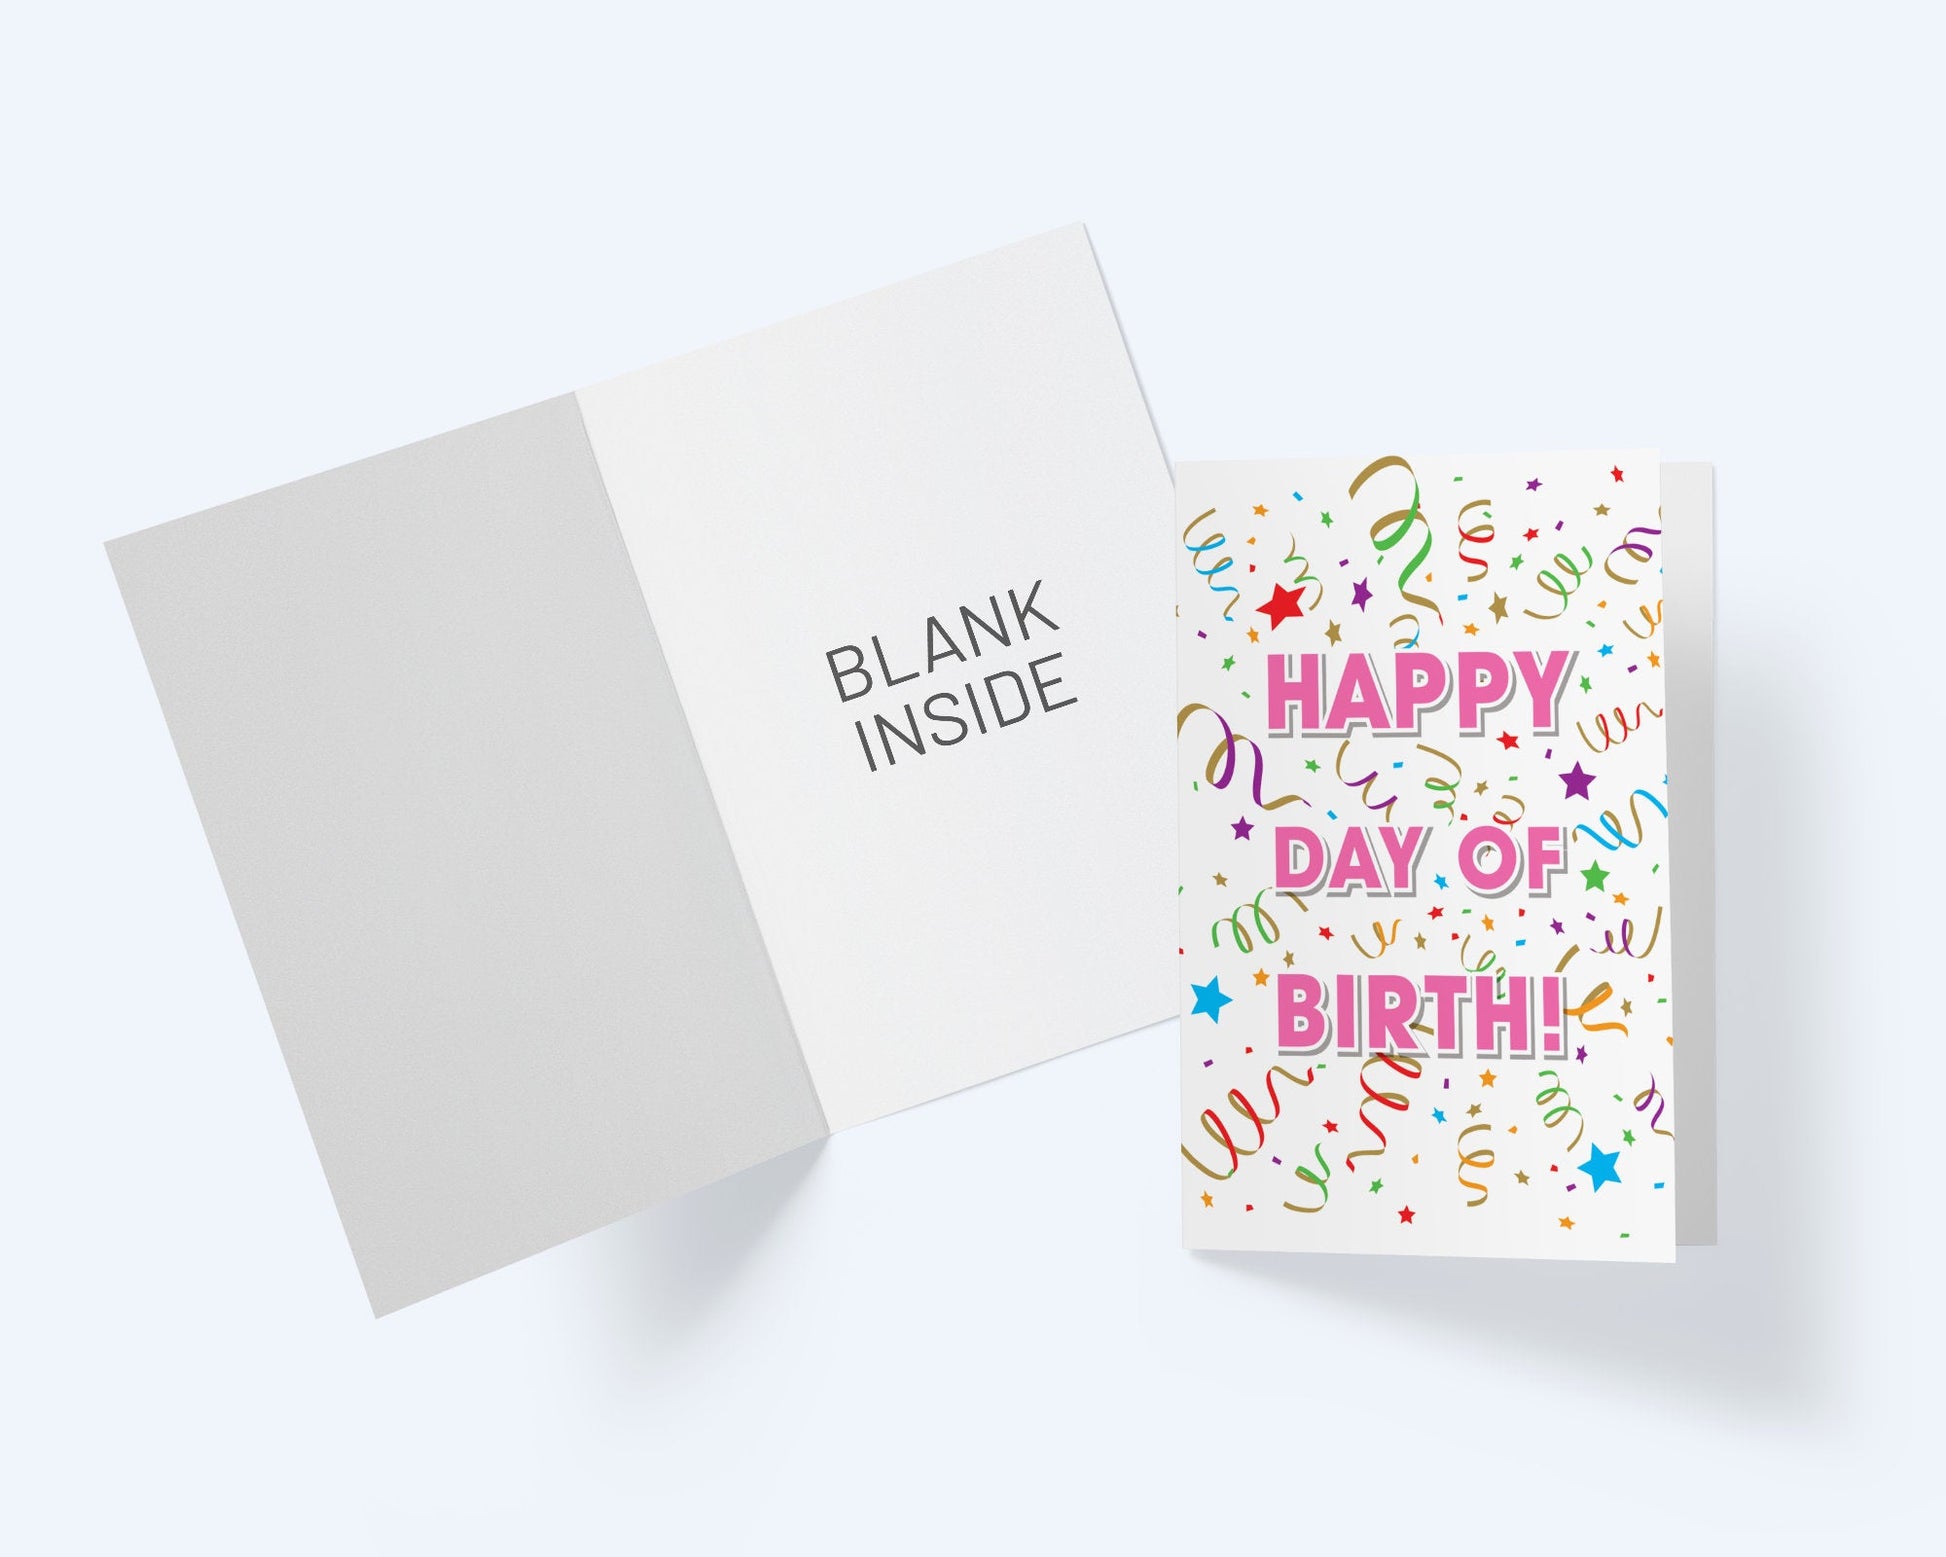 Happy Day of Birth Greeting Card- Birthday Card For Kids.